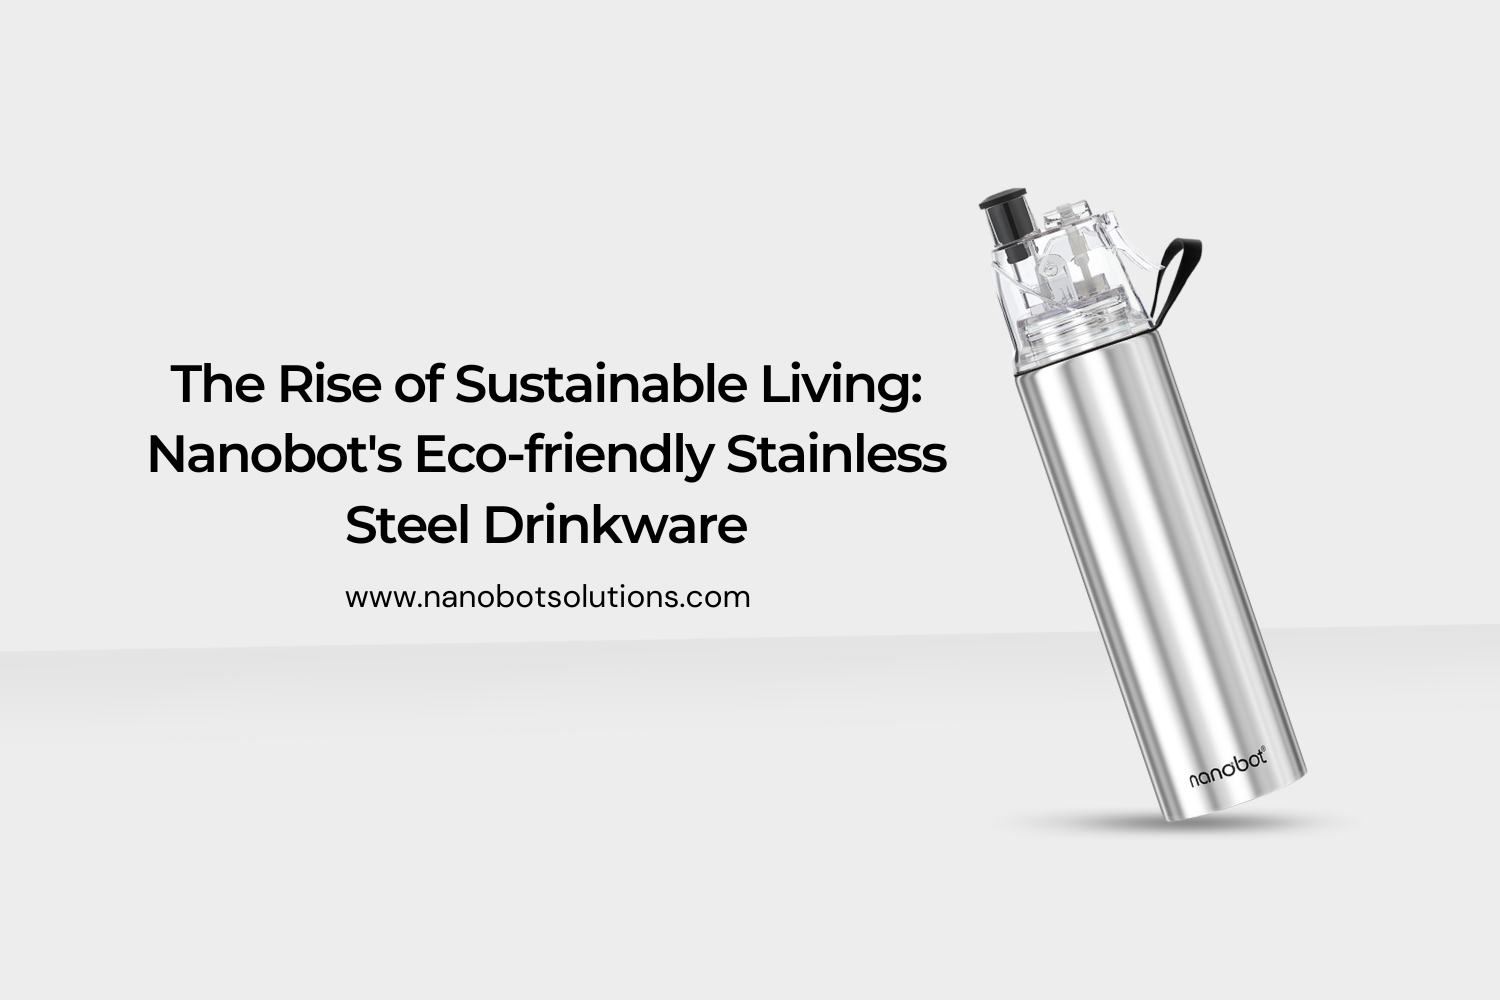 The Rise of Sustainable Living Nanobot's Eco-friendly Stainless Steel Drinkware